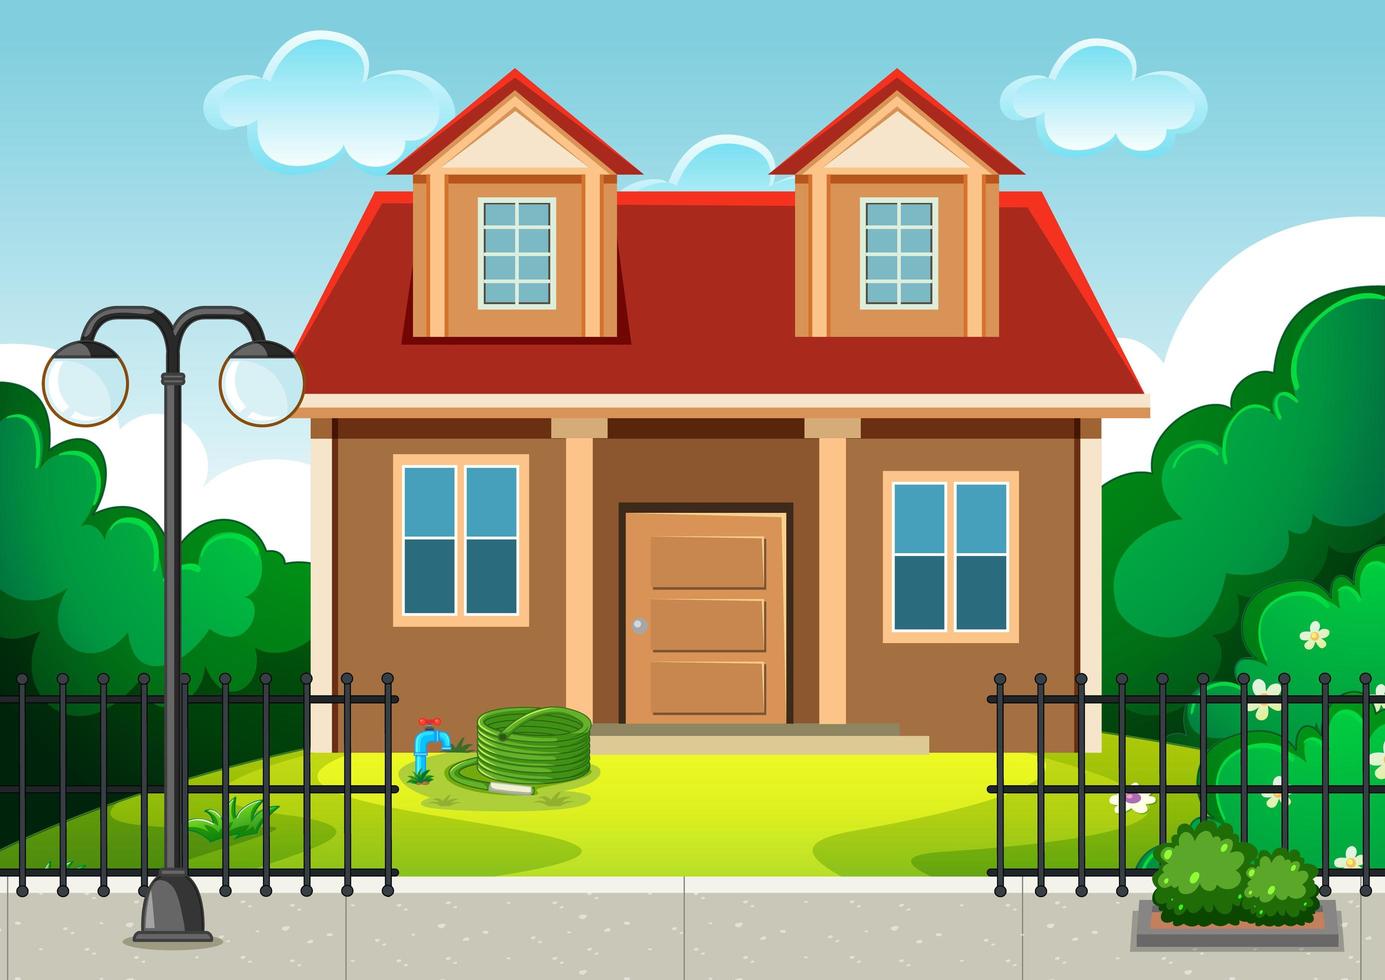 Empty scene with home building in nature vector